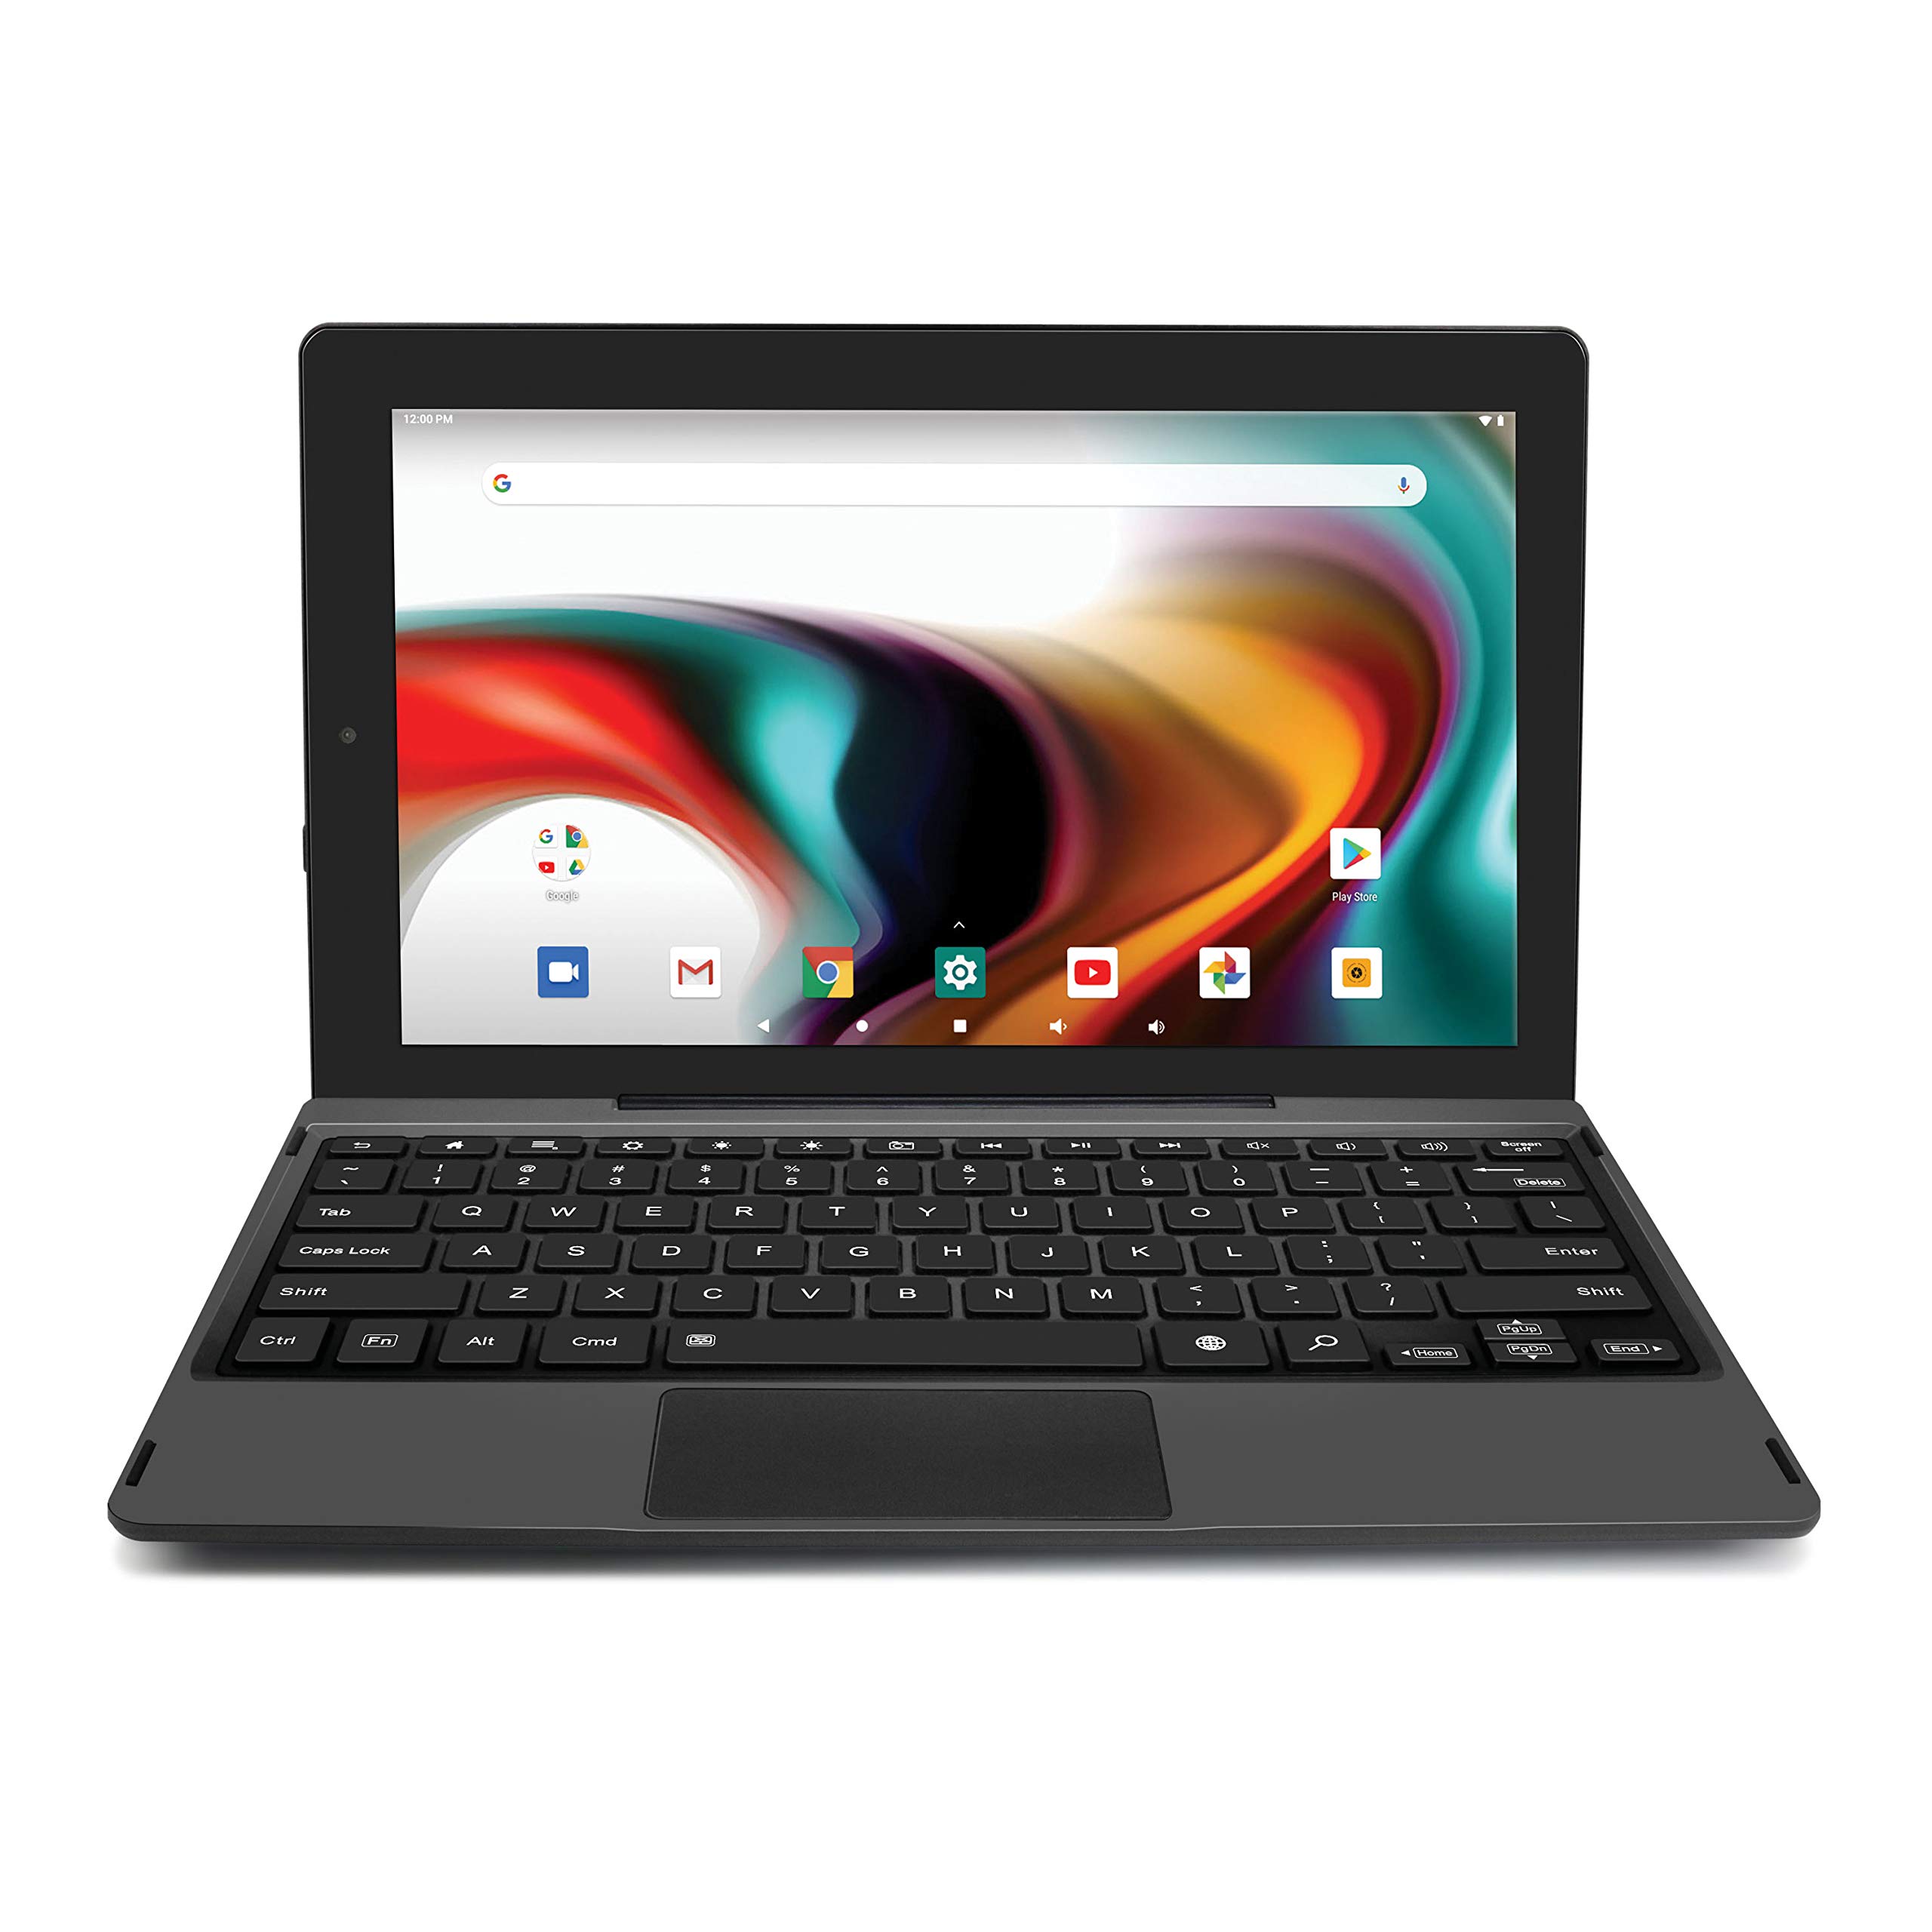 RCA 11 Delta Pro 11.6 Inch Quad-Core 2GB RAM 32GB Storage IPS 1366 x 768 Touchscreen WiFi Bluetooth with Detachable Keyboard Android 9.0 Tablet (11.6", Charcoal)